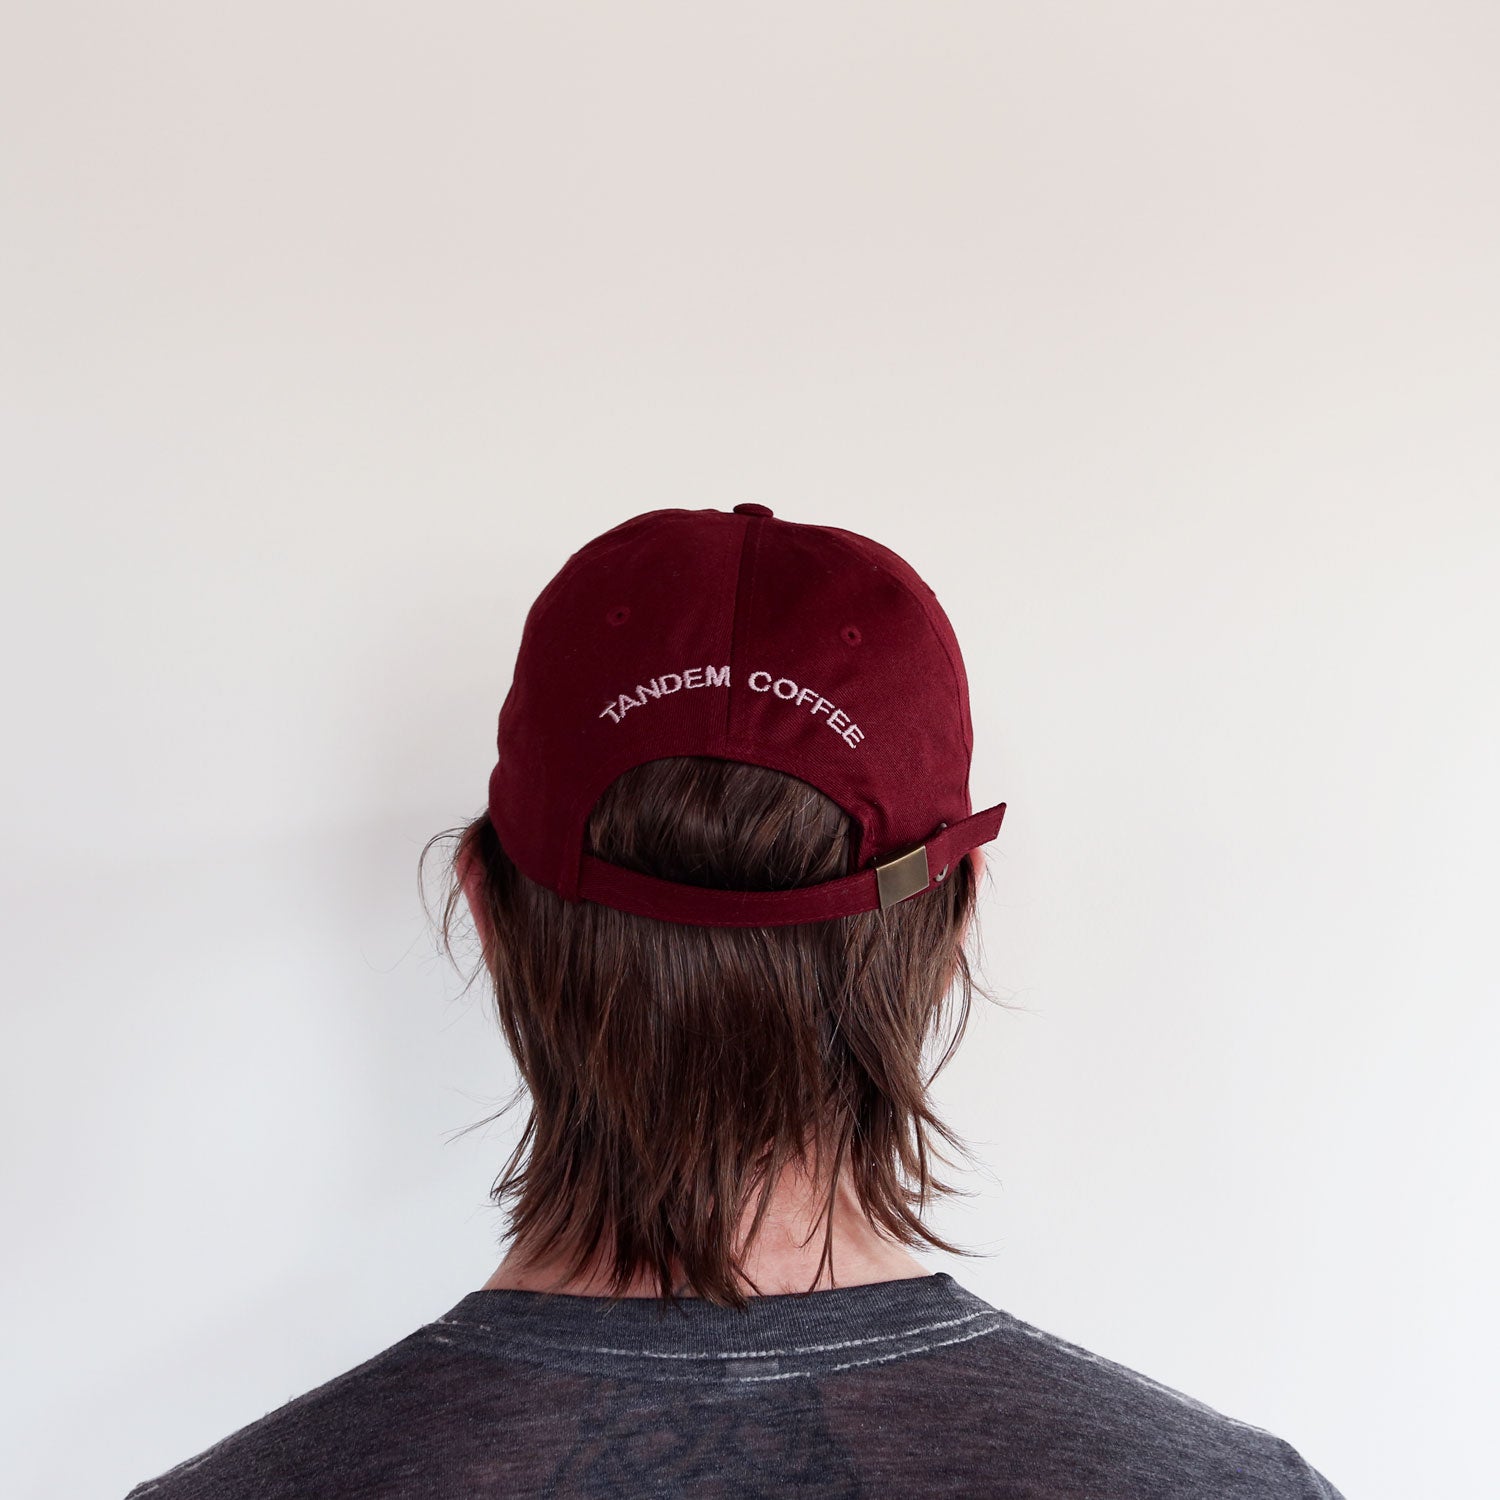 A person wearing a maroon, 100% cotton Maroon Logo Dad Hat from Tandem Coffee Roasters adjusts it, their face partially obscured. They have tattoos on both arms and are dressed in a grey t-shirt. The background is a plain white wall.